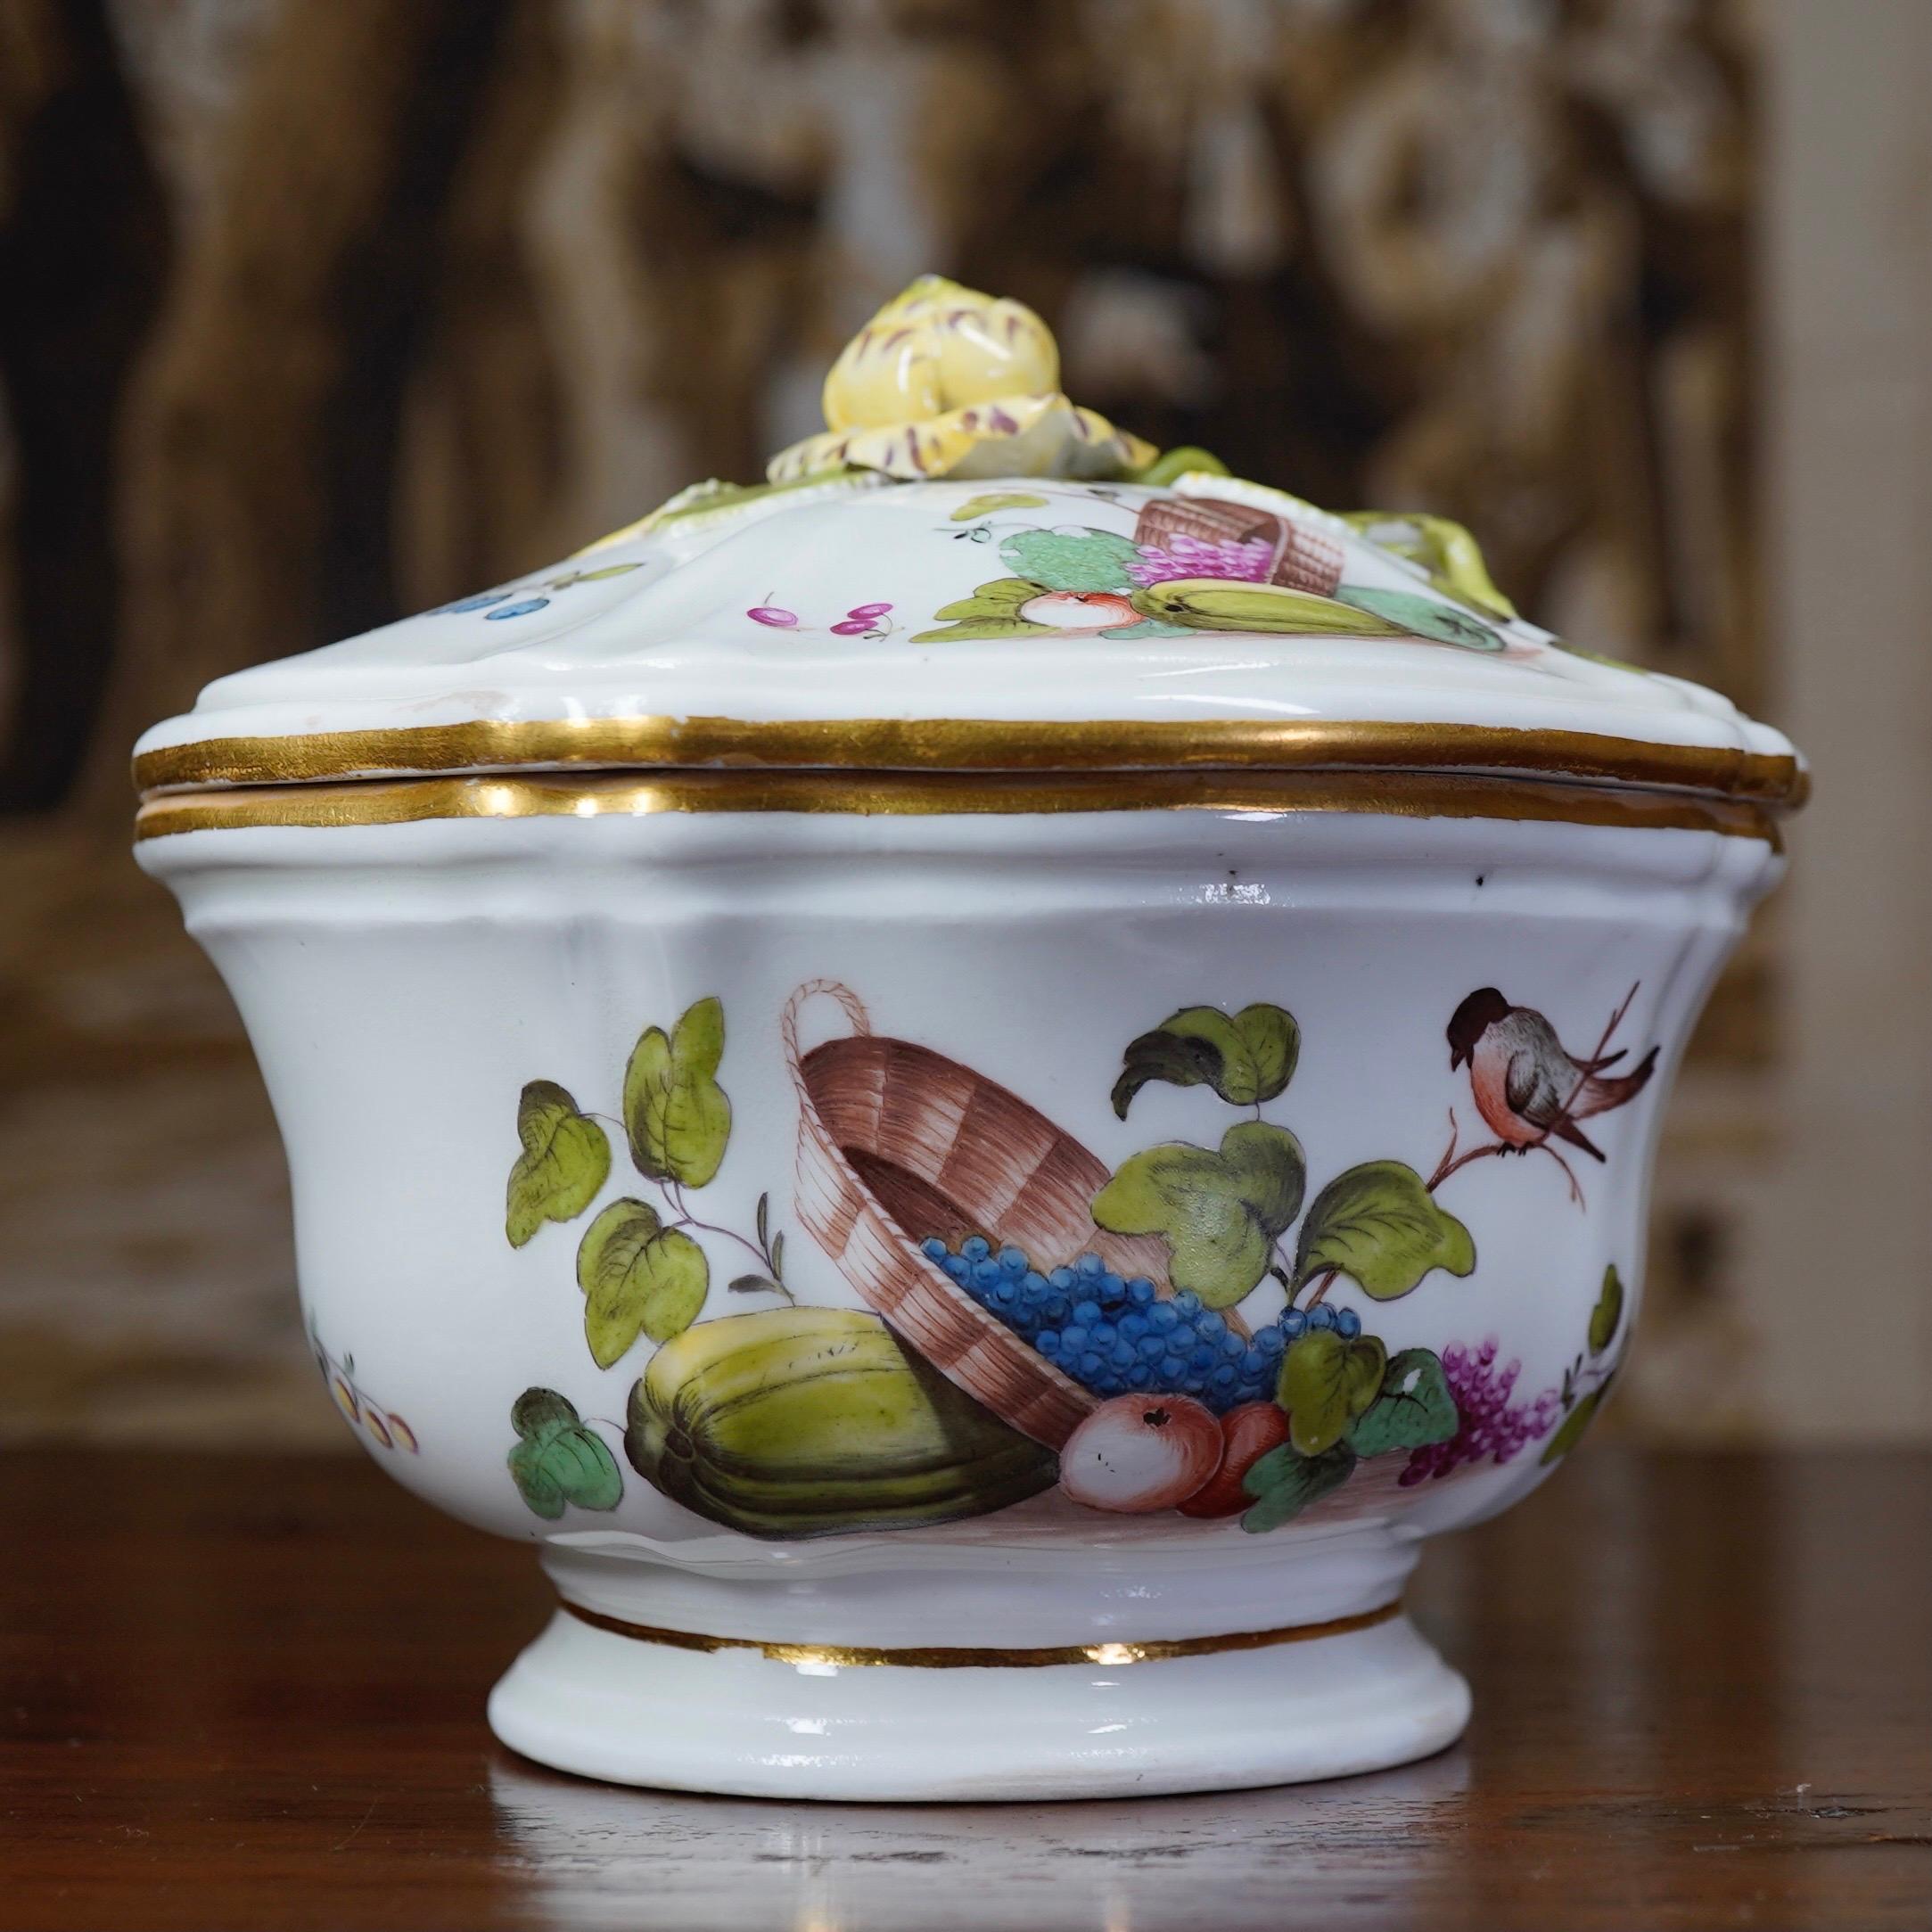 Vienna sucrier of elaborate rococo form, with ribbed body after a metal form, painted with a wicker basket spilling grapes and apples, resting on a melon, with a bird perched to one side, the reverse with cut melons and grapes, the lid with similar